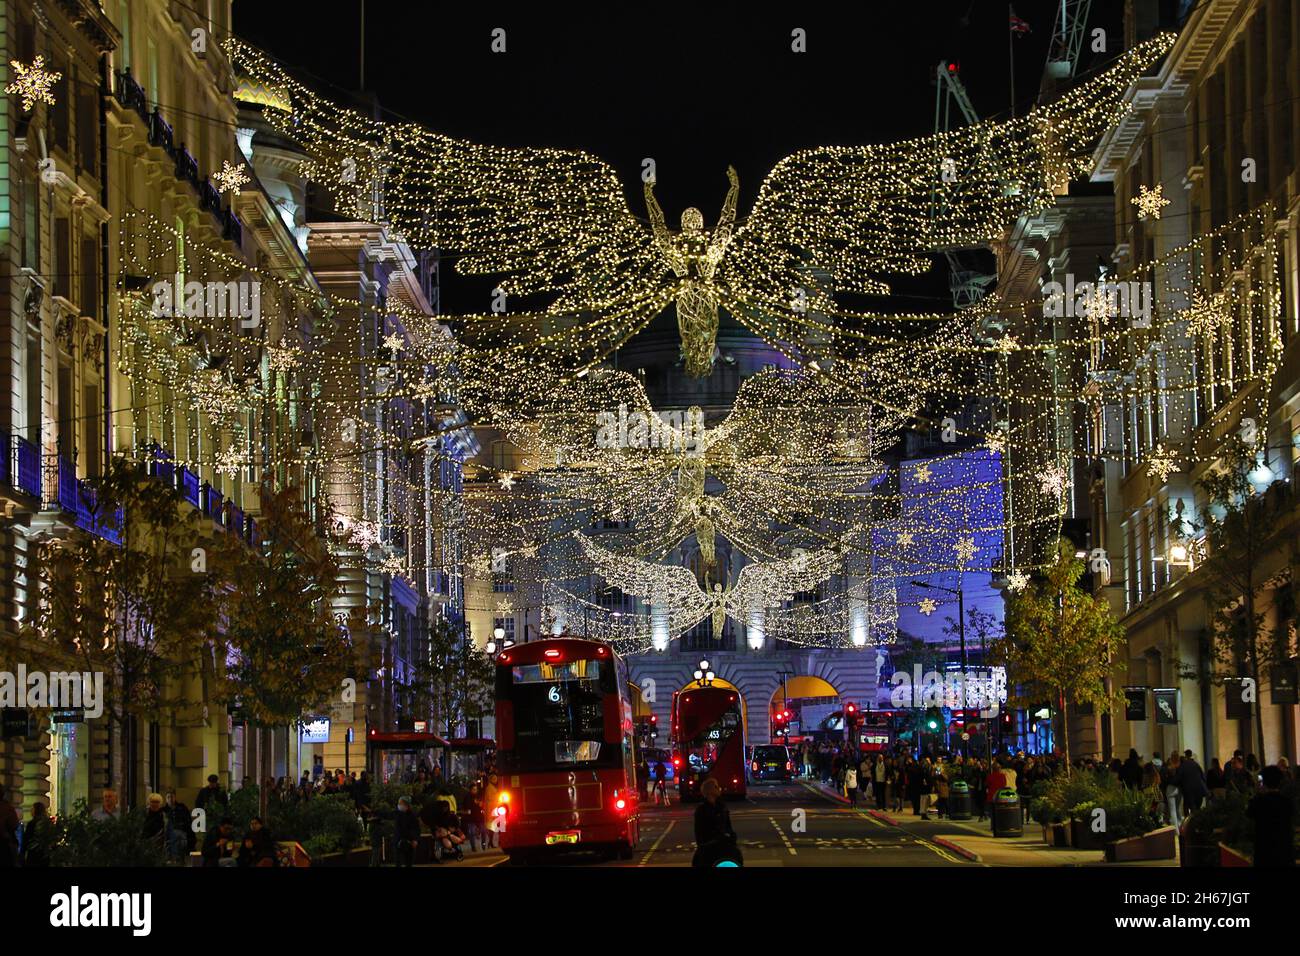 London, UK. 13th Nov, 2021. Angel shaped Christmas decorations in ...